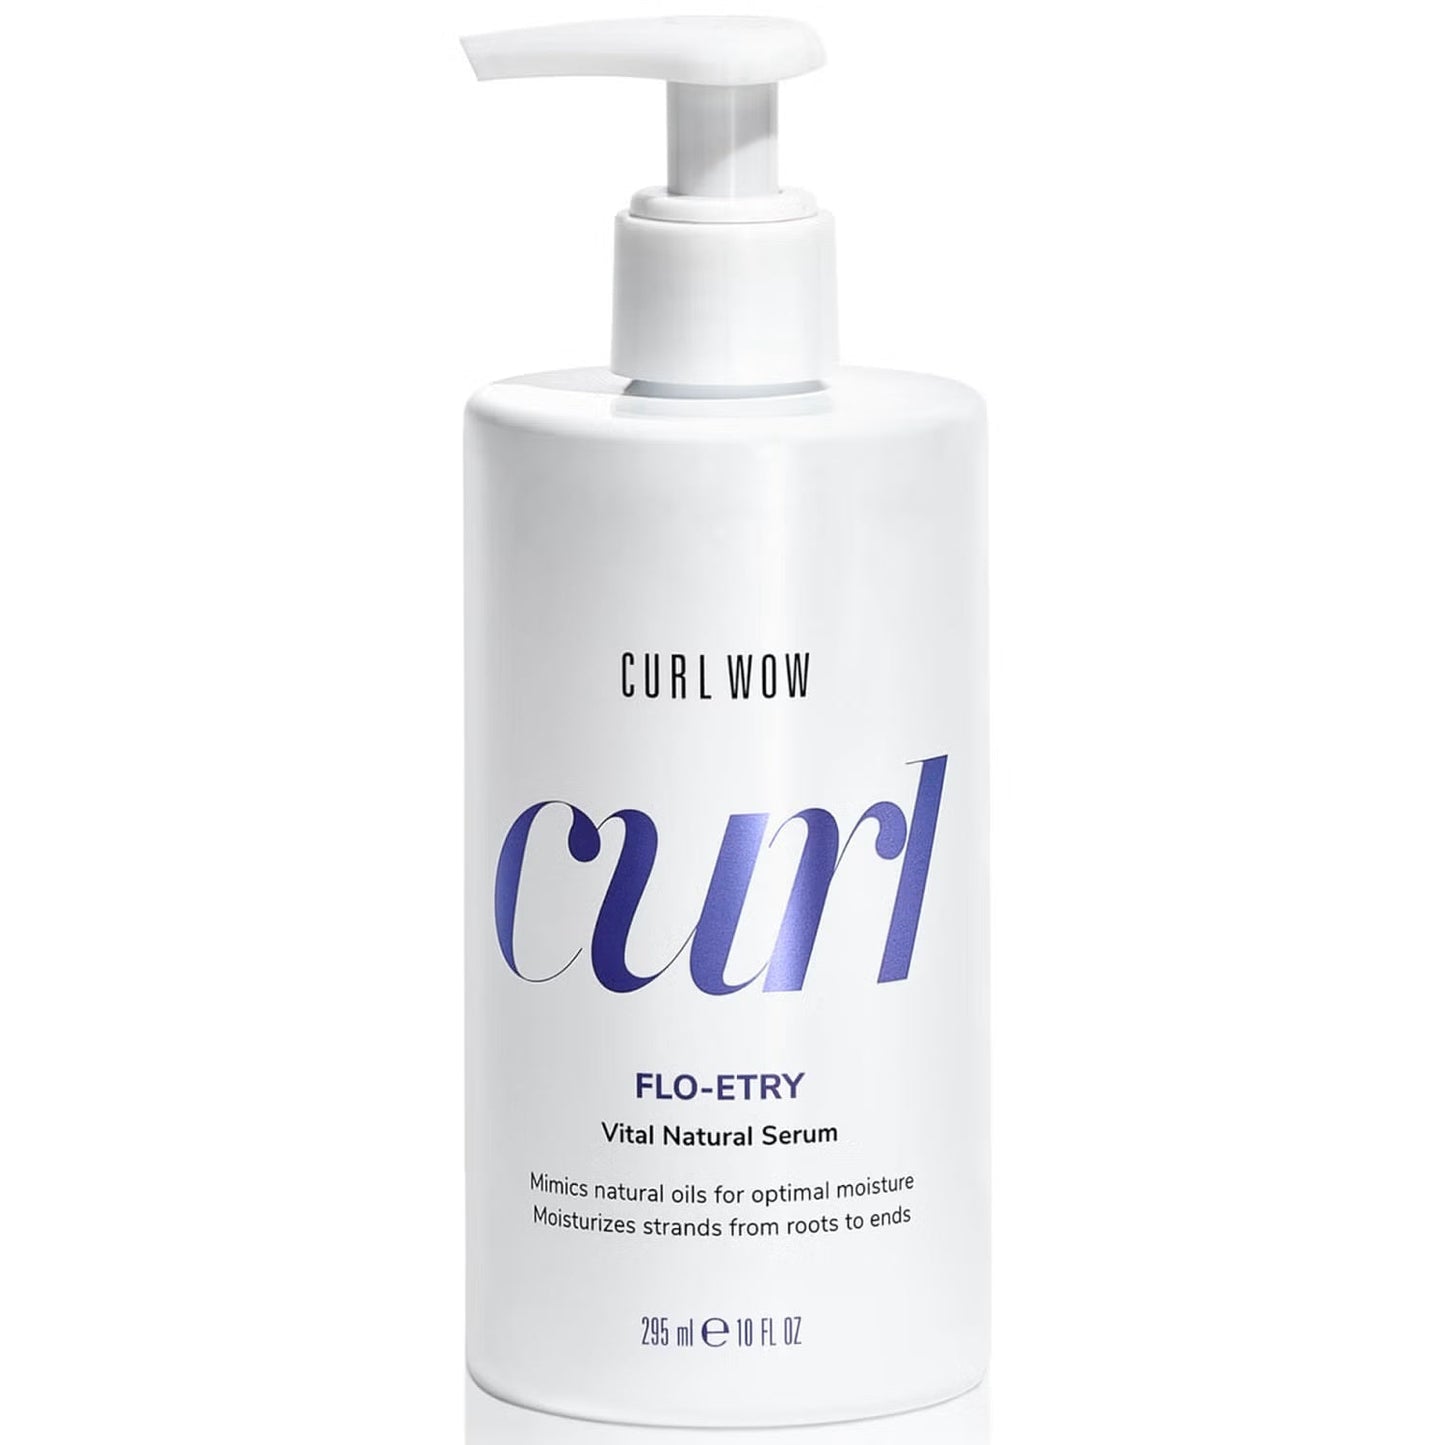 Color WOW Curl Wow FLO-ETRY Vital Natural Serum Supplement 295ml